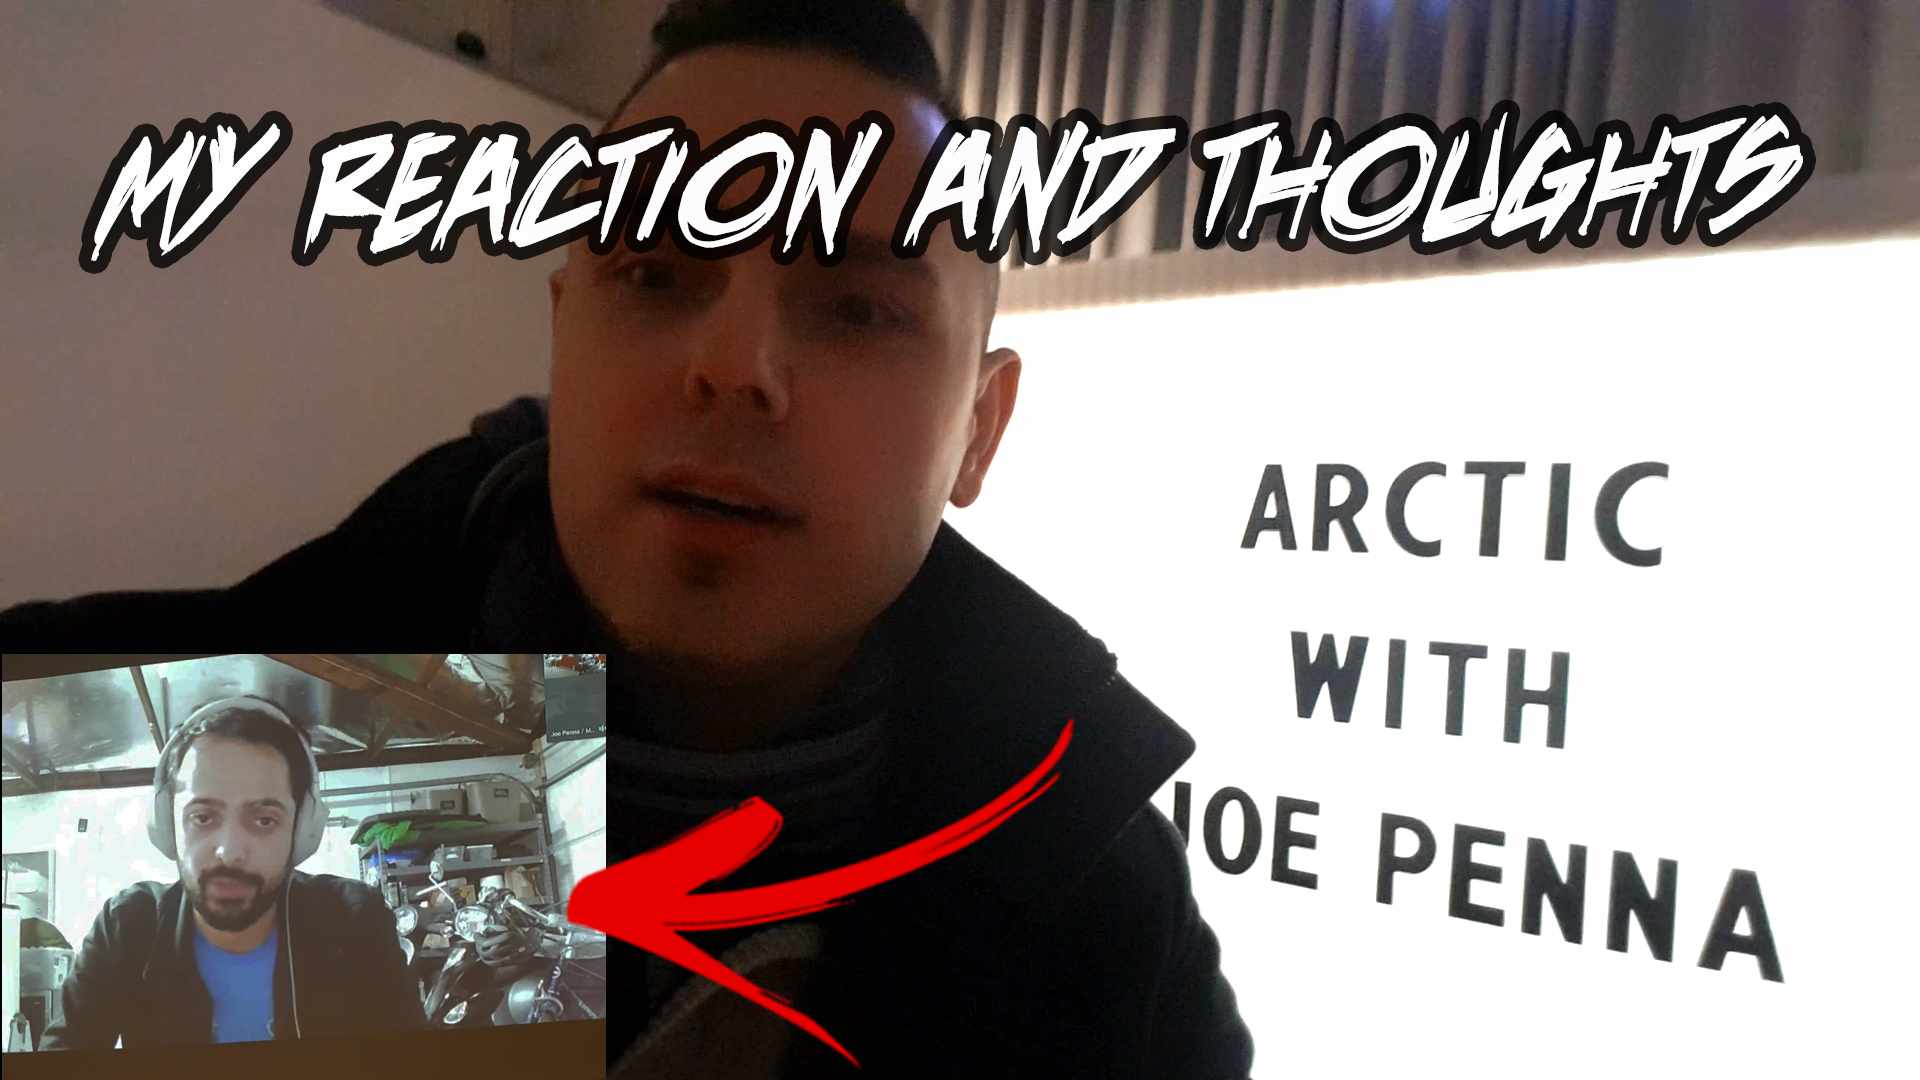 ARCTIC MOVIE - Full Film Reaction, Secrets From the Set, Joe Penna Q&A at Toronto Youtube Space